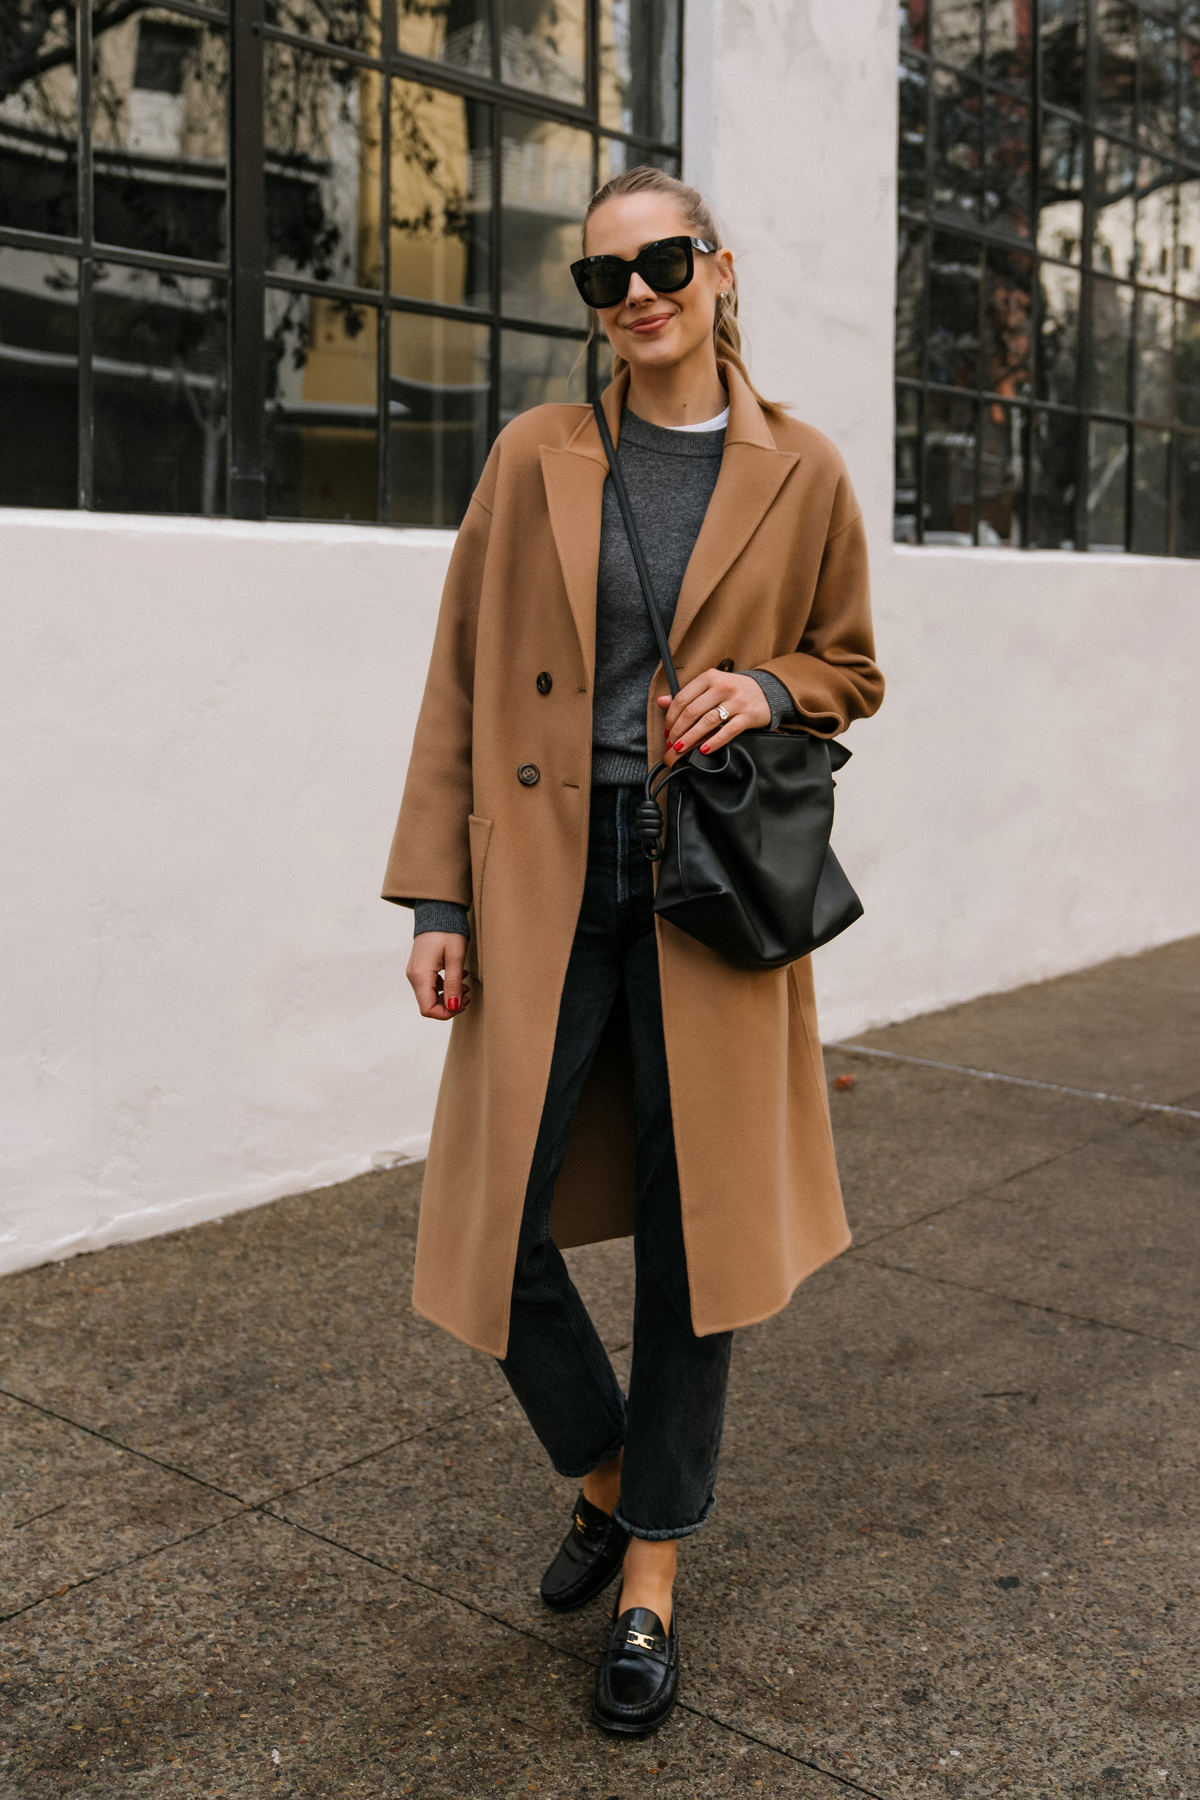 Fashion Jackson Wearing Anine Bing Dylan Coat Charcoal Sweater AGOLDE Black Jeans Celine Luco Triomphe Loafers Black Loewe Flamenco Handbag Camel Coat Outfit For Women Loafer Outfit Street Style 1